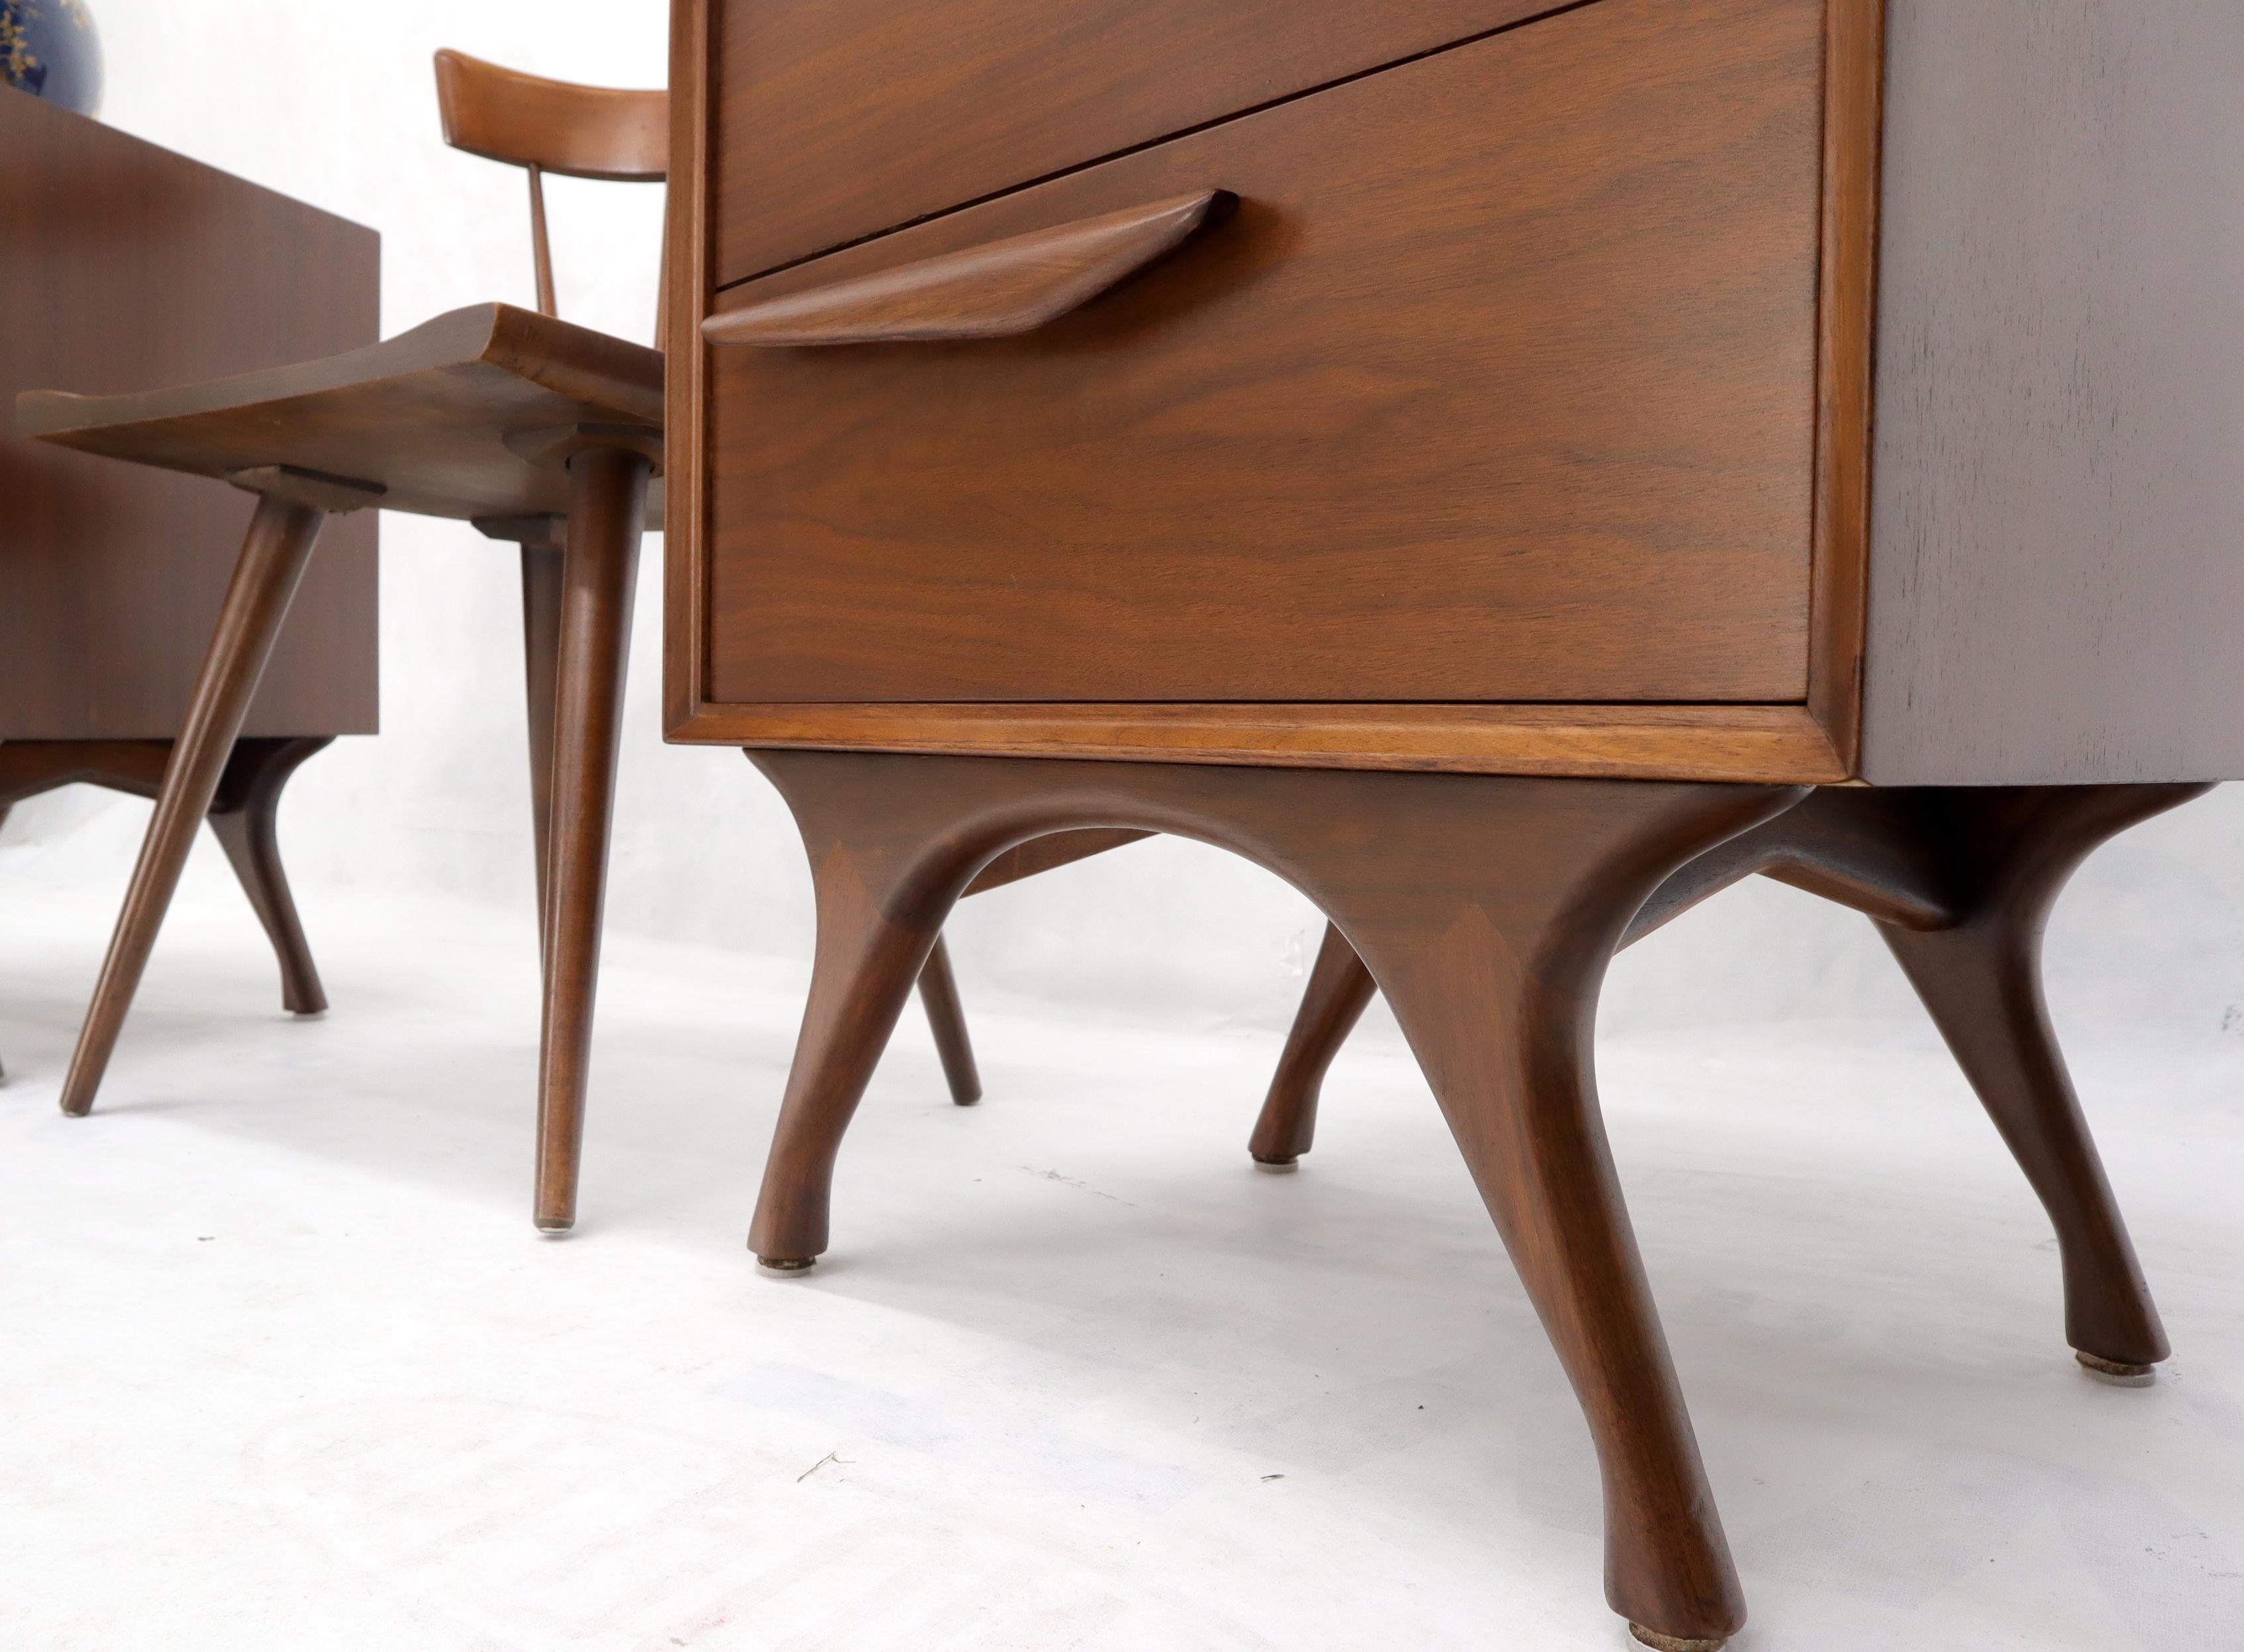 Pair of American Modern Walnut Sculptured Legs Pulls Two Drawers Nightstands For Sale 6